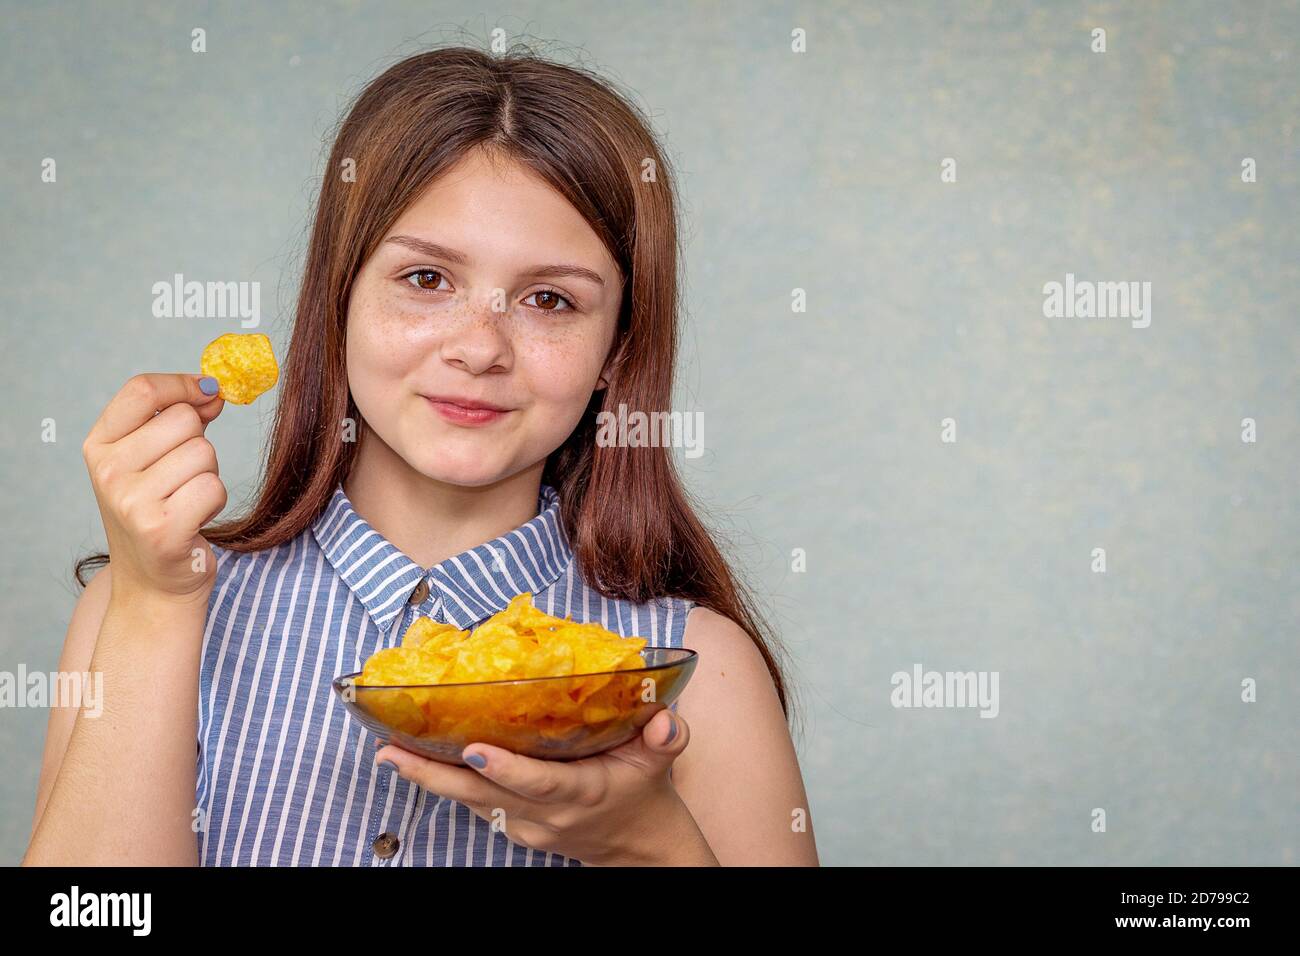 A young girl holds a plate with chips in her hand, chips in the other, smiles and is ready to eat this fast food. Selective focus Stock Photo